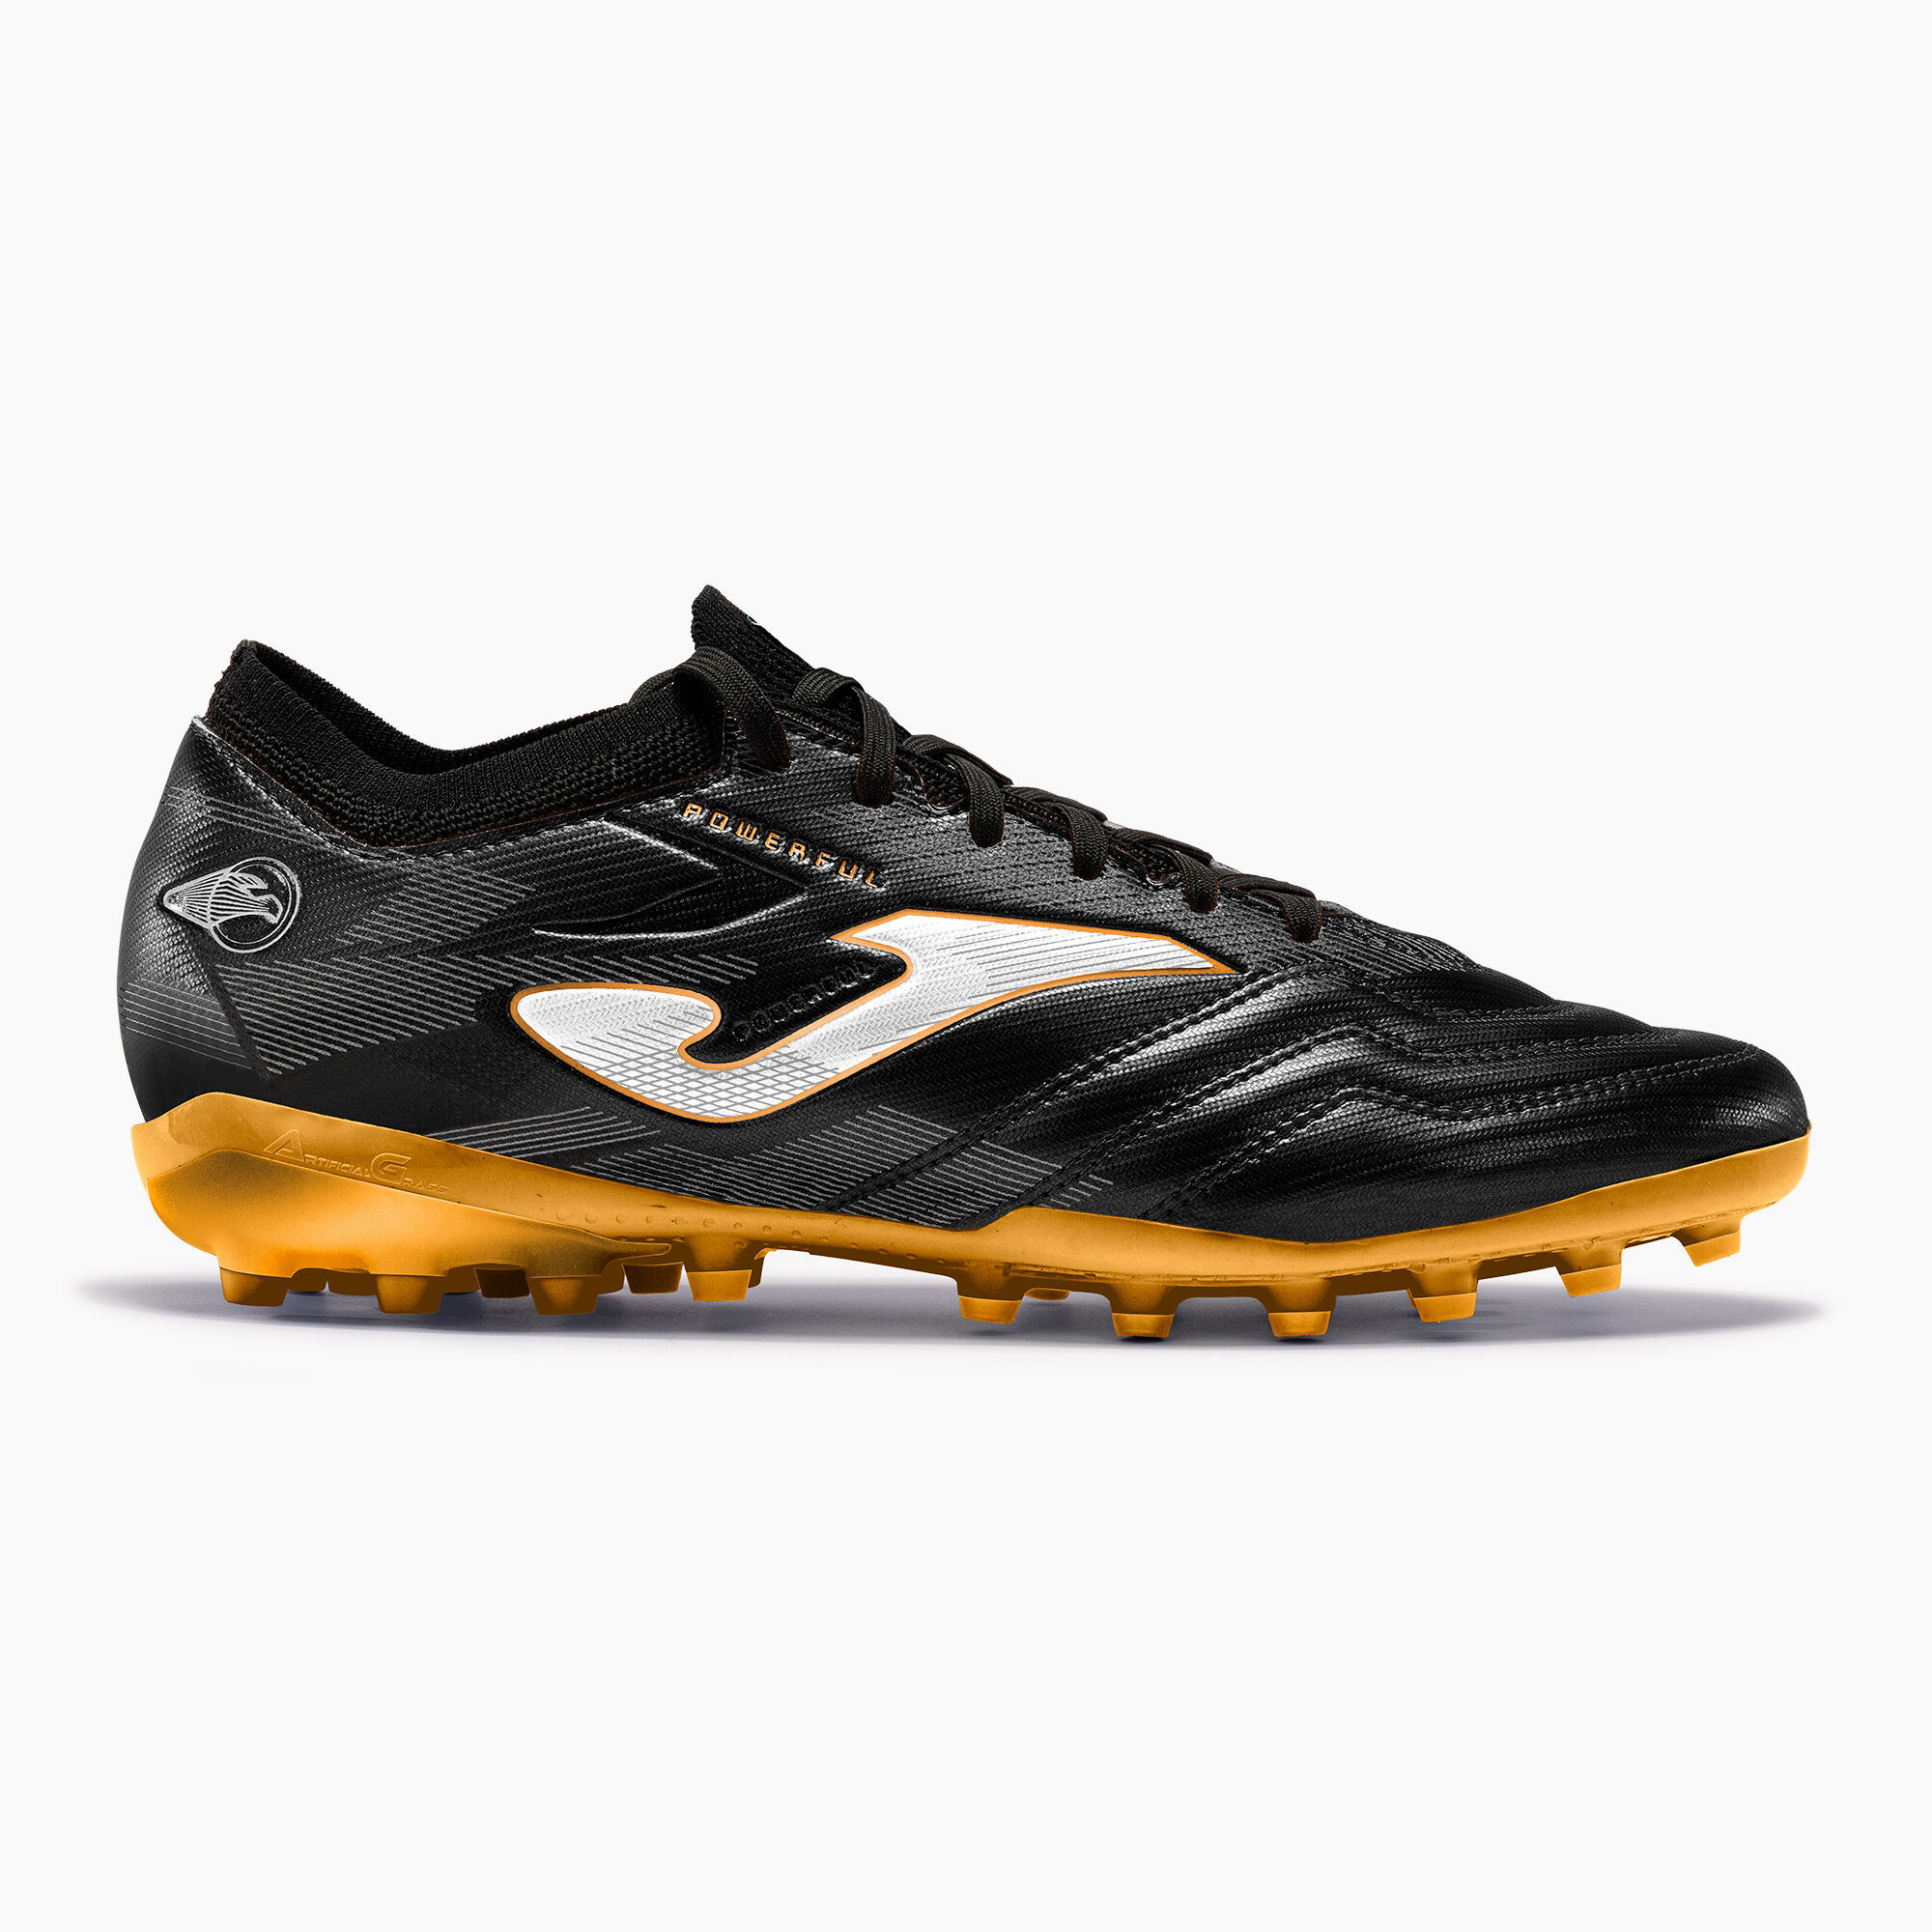 Chaussures football Powerful Cup 24 gazon synthétique AG noir or